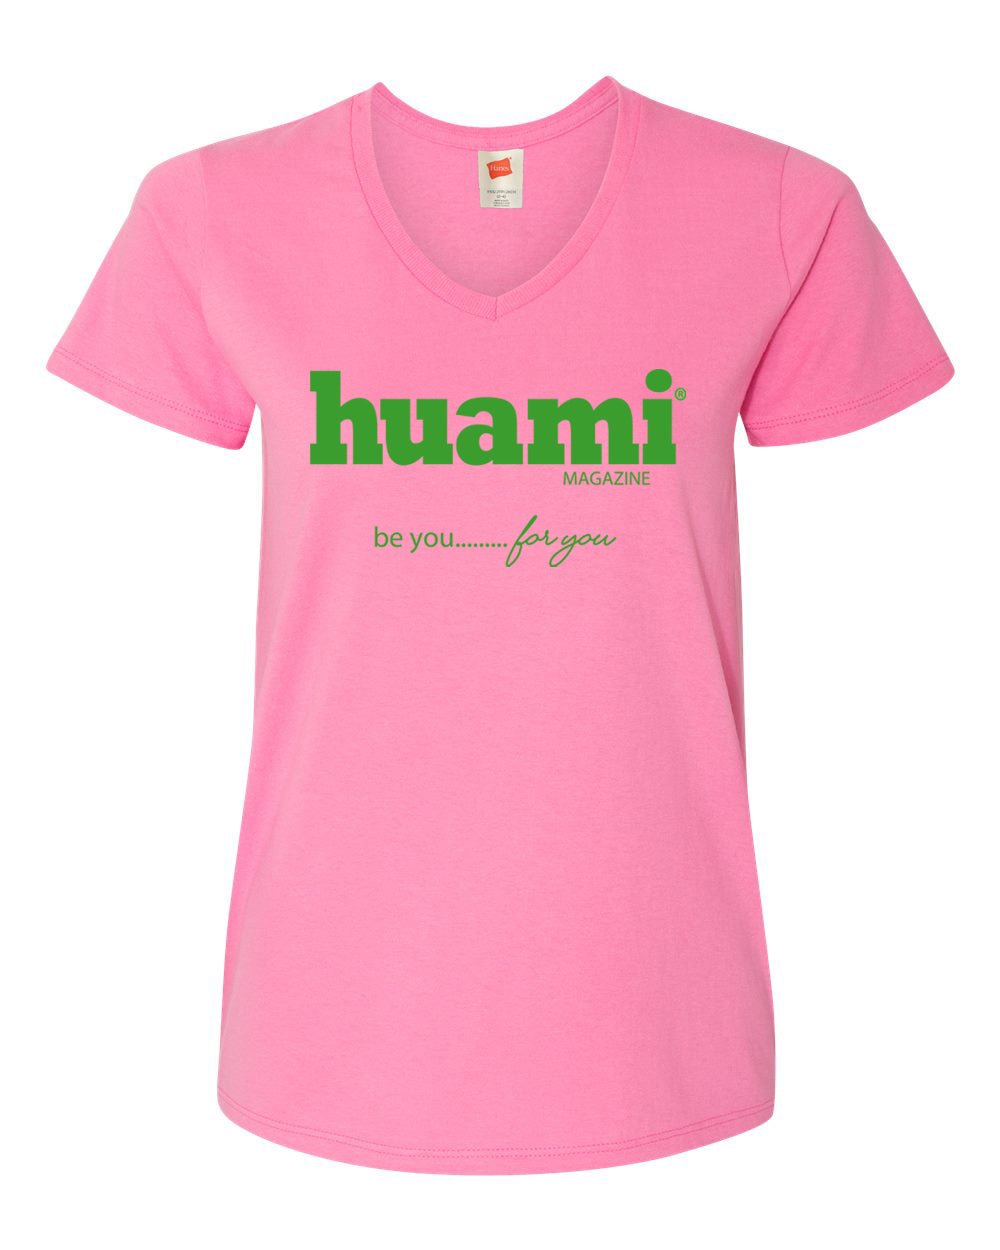 Ladies Pink and Green Short Sleeve (Be you)